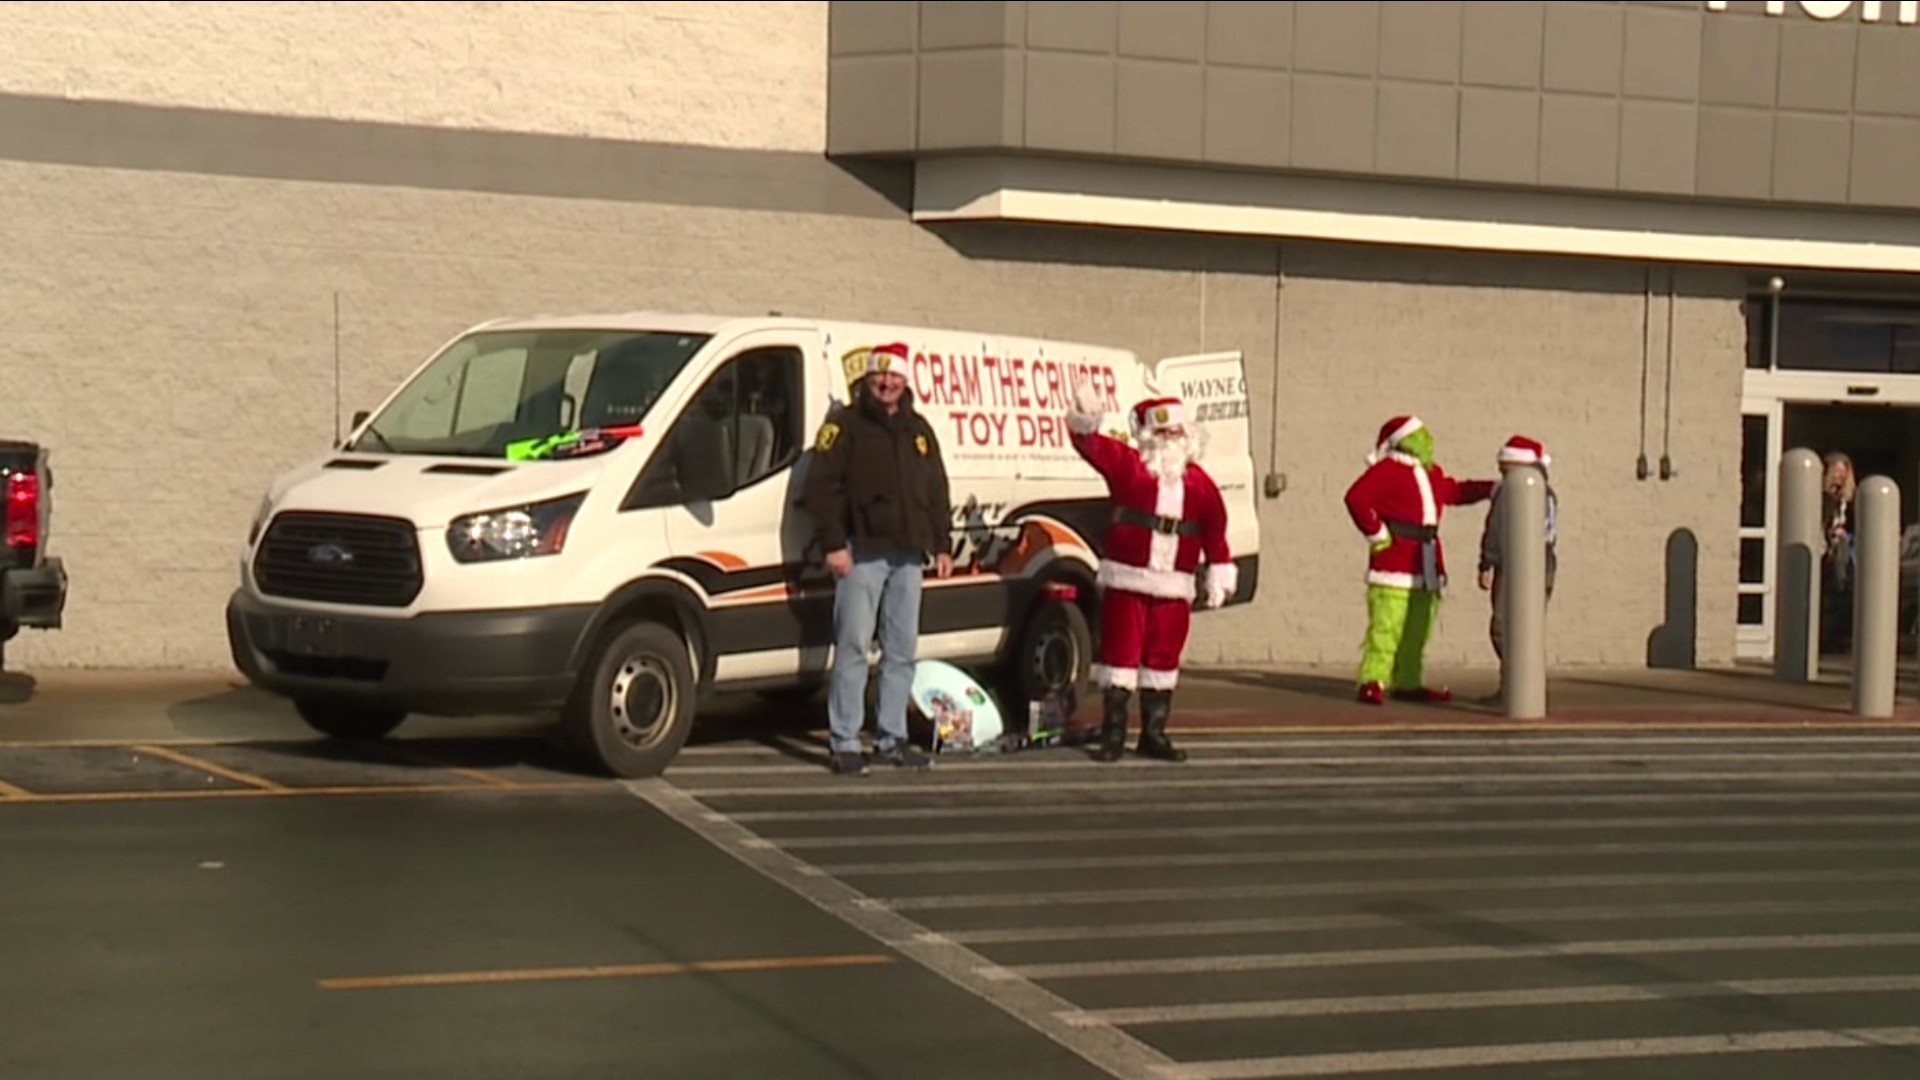 Black Friday shoppers in Honesdale are helping to spread Christmas cheer to families in need.